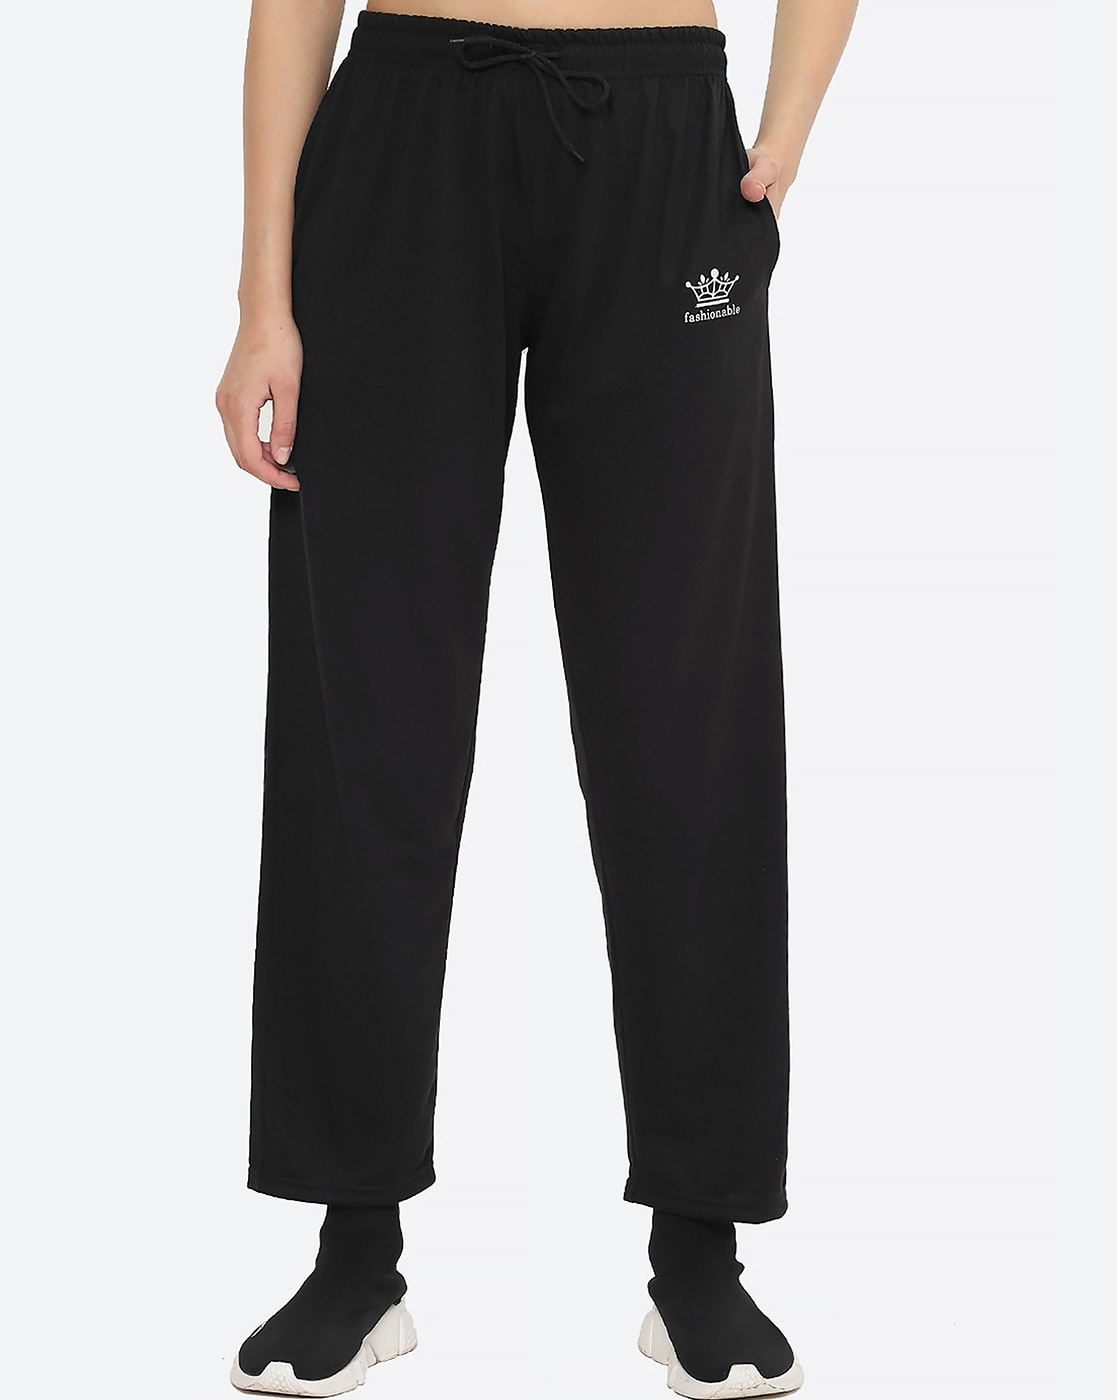 Sweatpants | Track Pants | Women's Plus Size Clothing | You + All